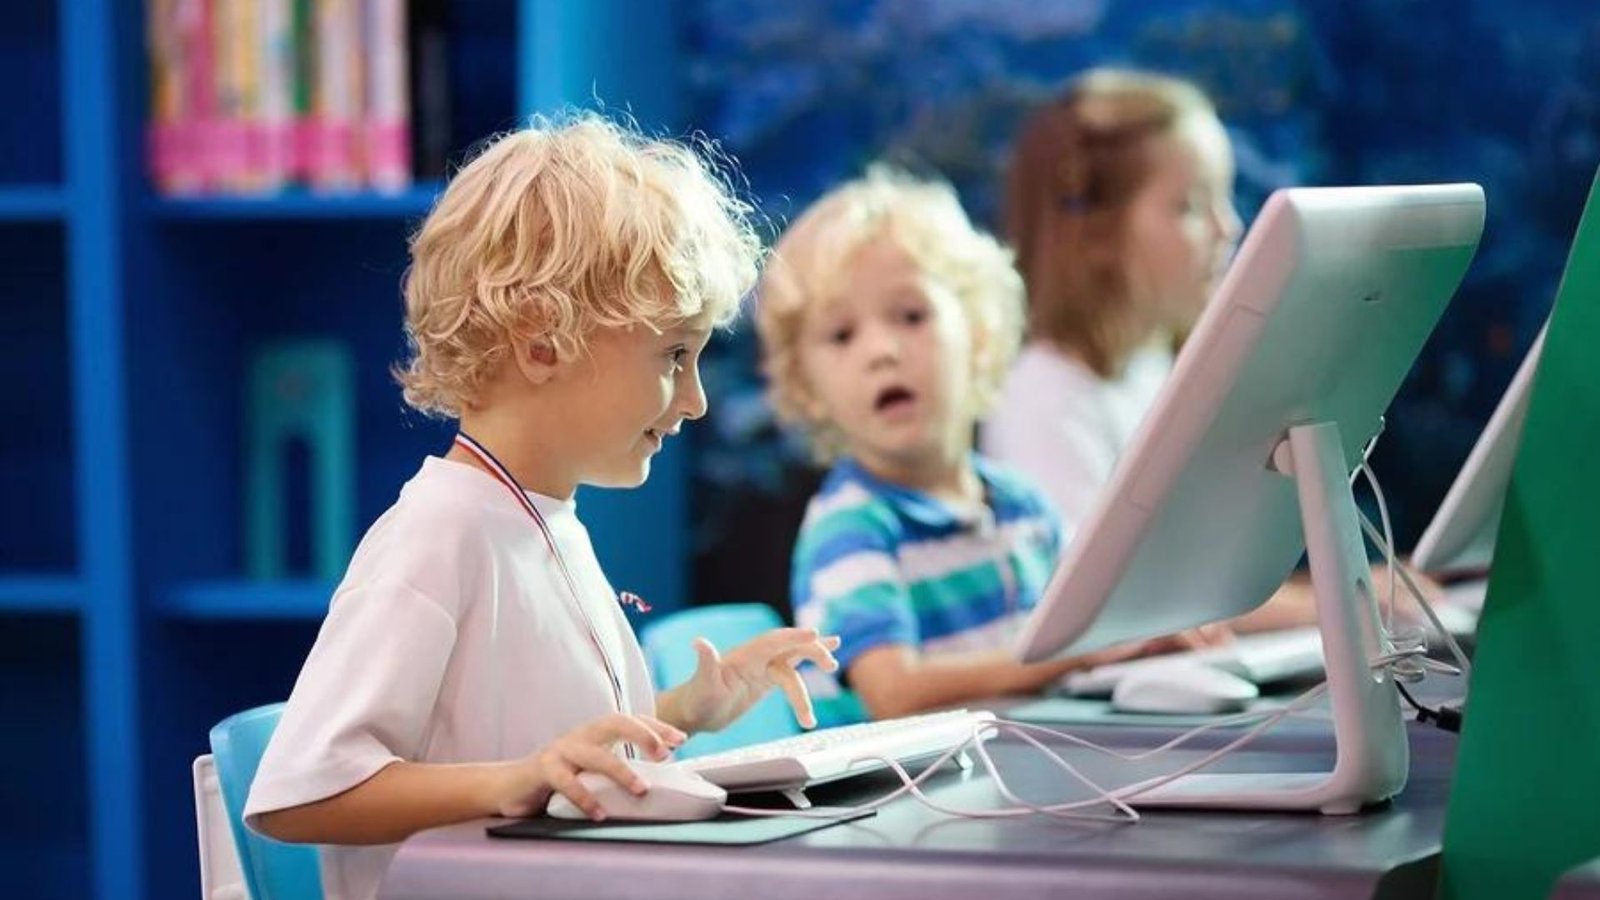 A Child Using a Computer